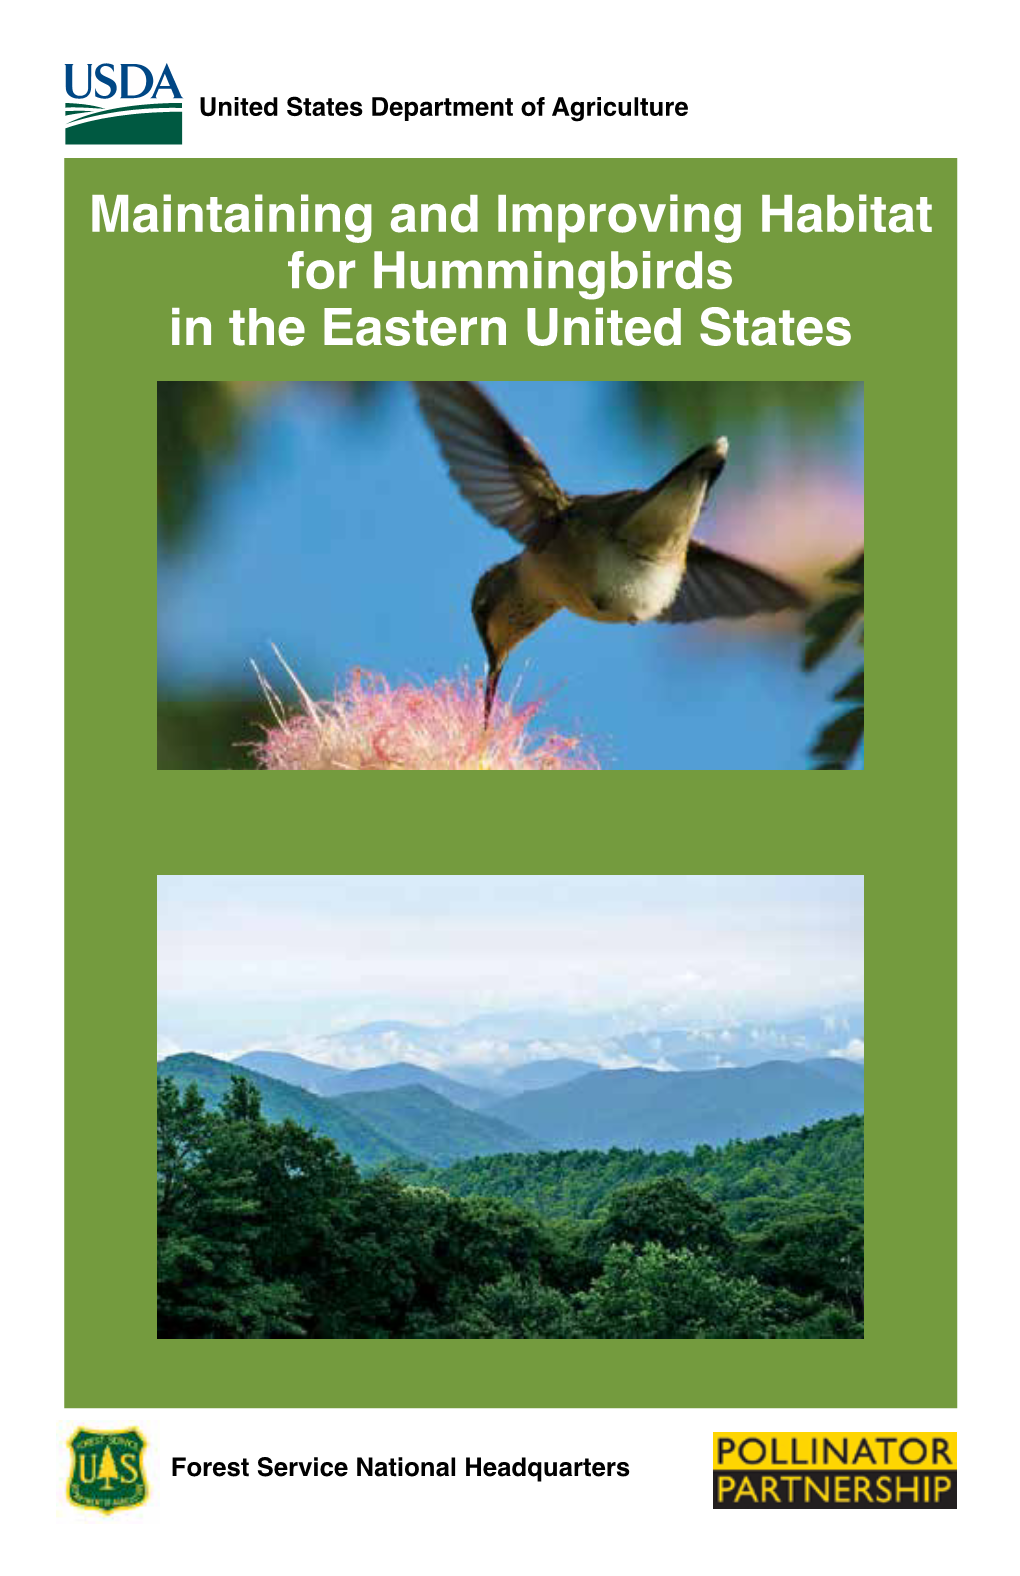 Maintaining and Improving Habitat for Hummingbirds in the Eastern United States